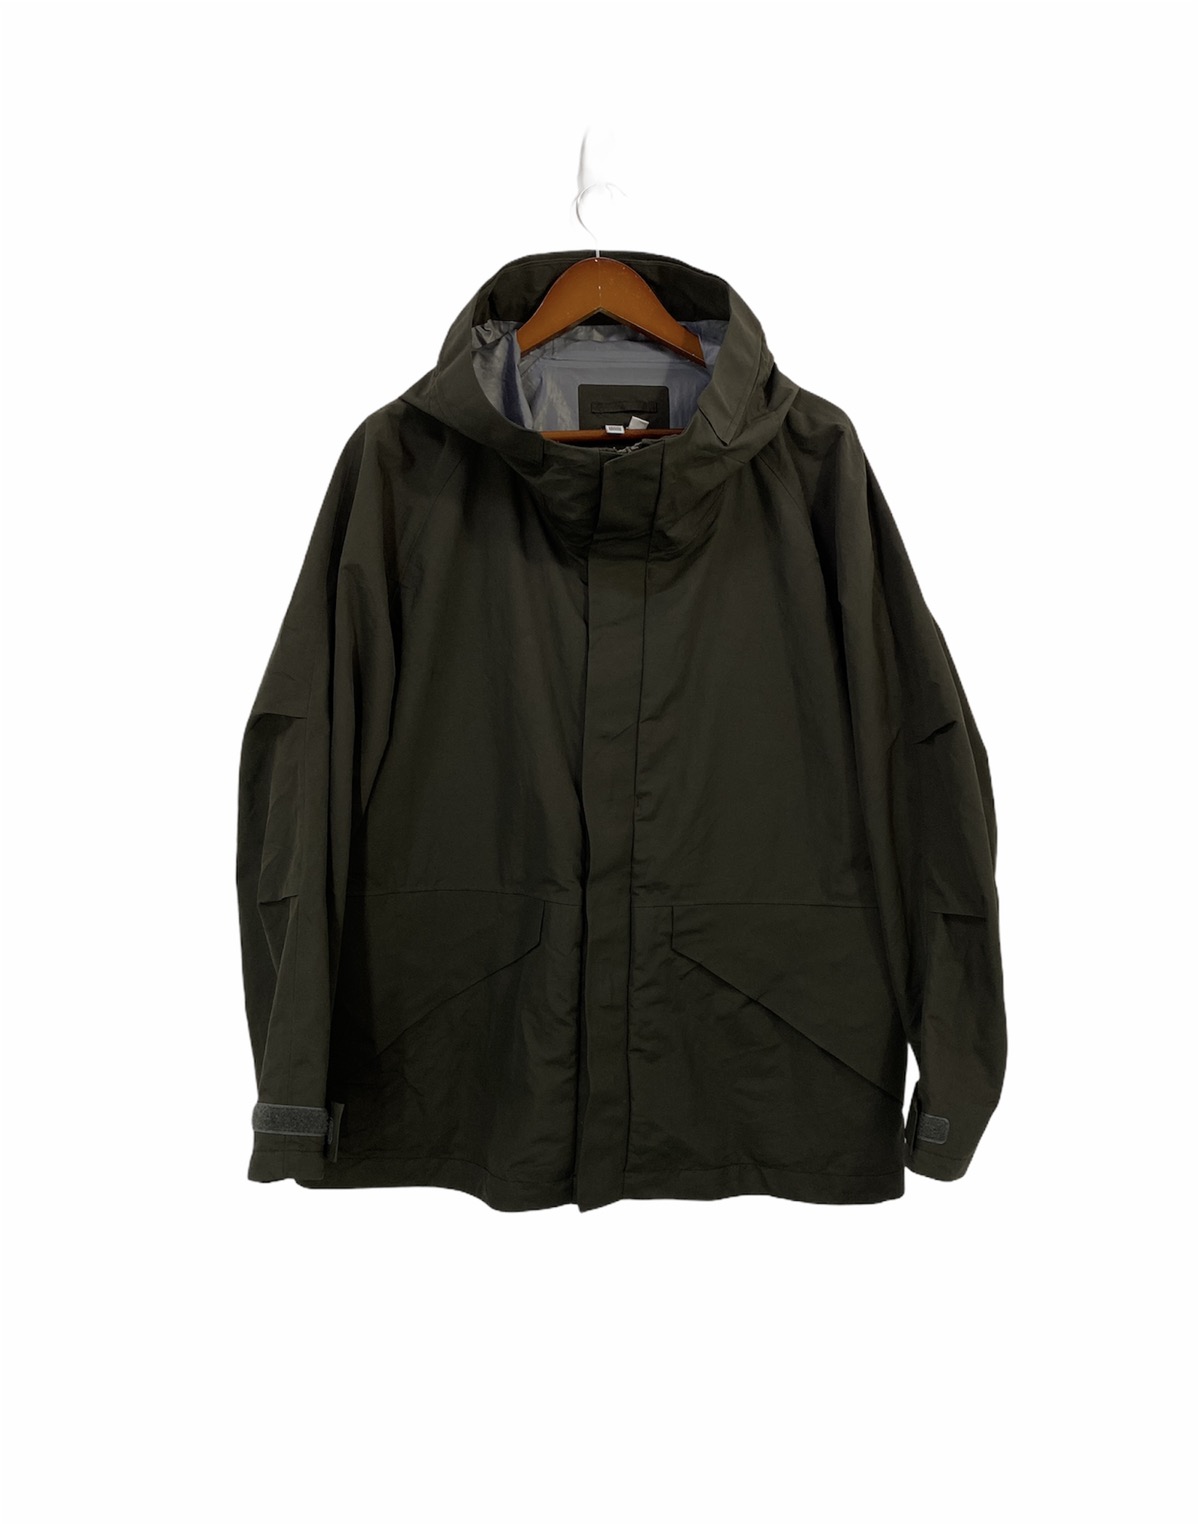 Lemaire X Uniqlo Waterproof Jacket Olive Color with Hoodies - 1